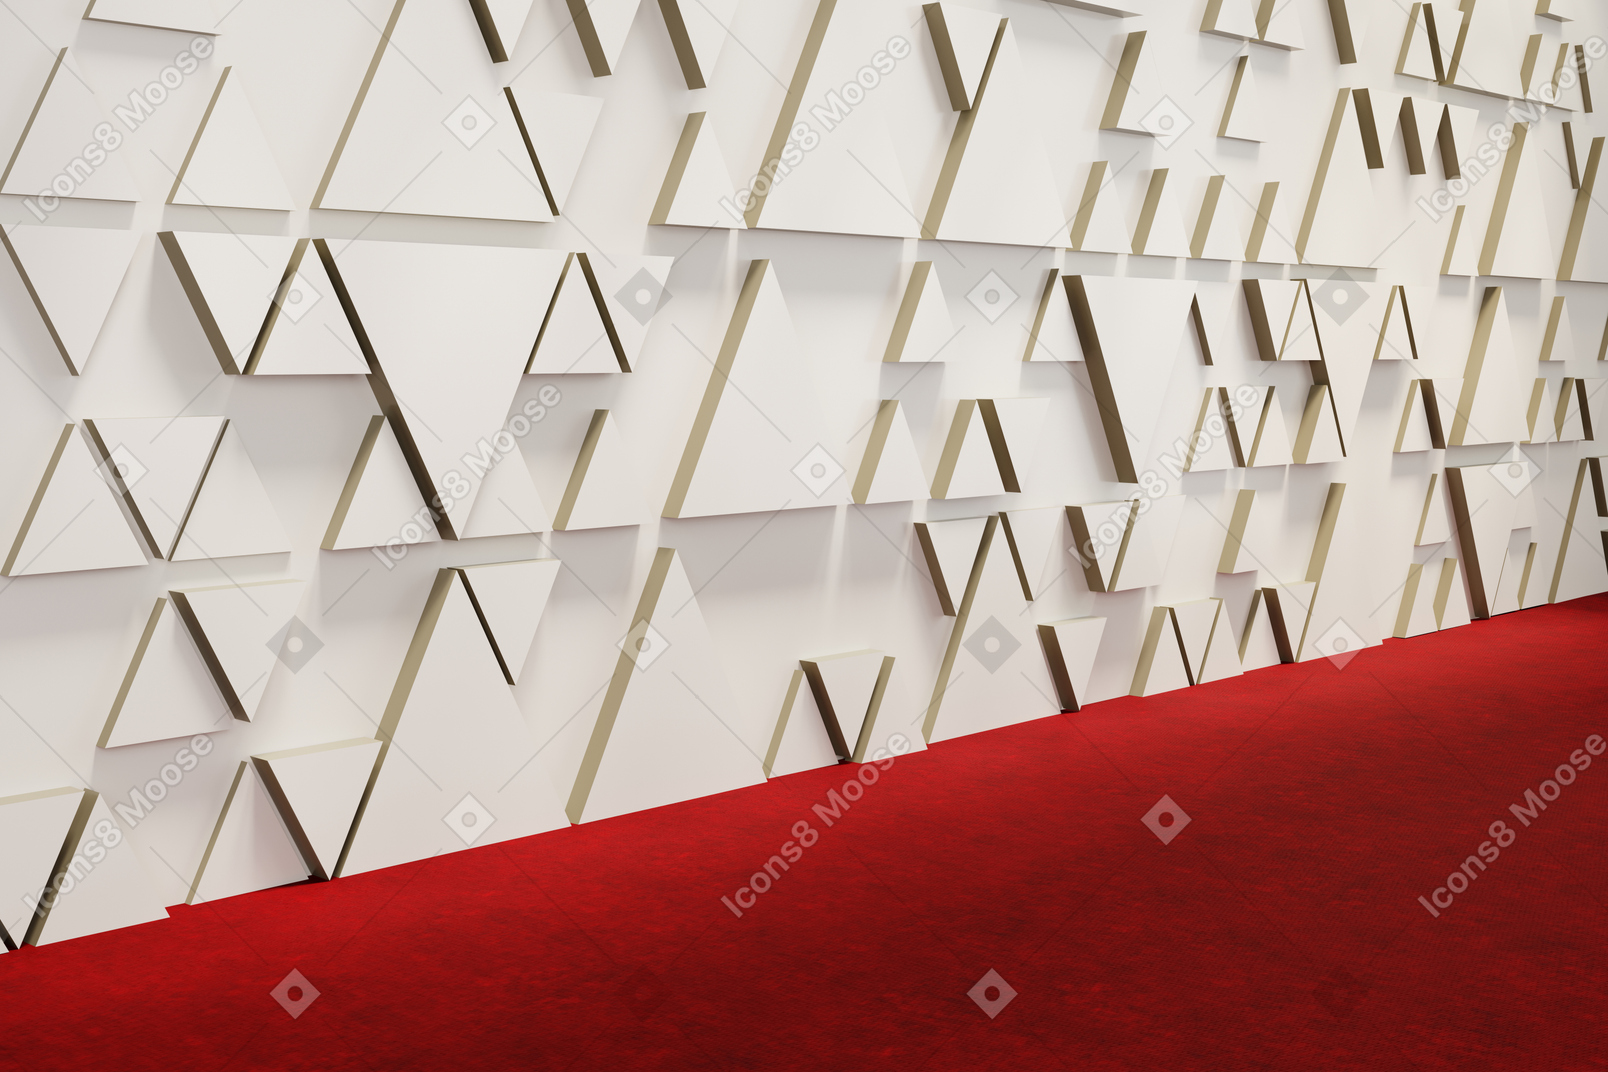 A press wall decorated with triangles and a red carpet below it